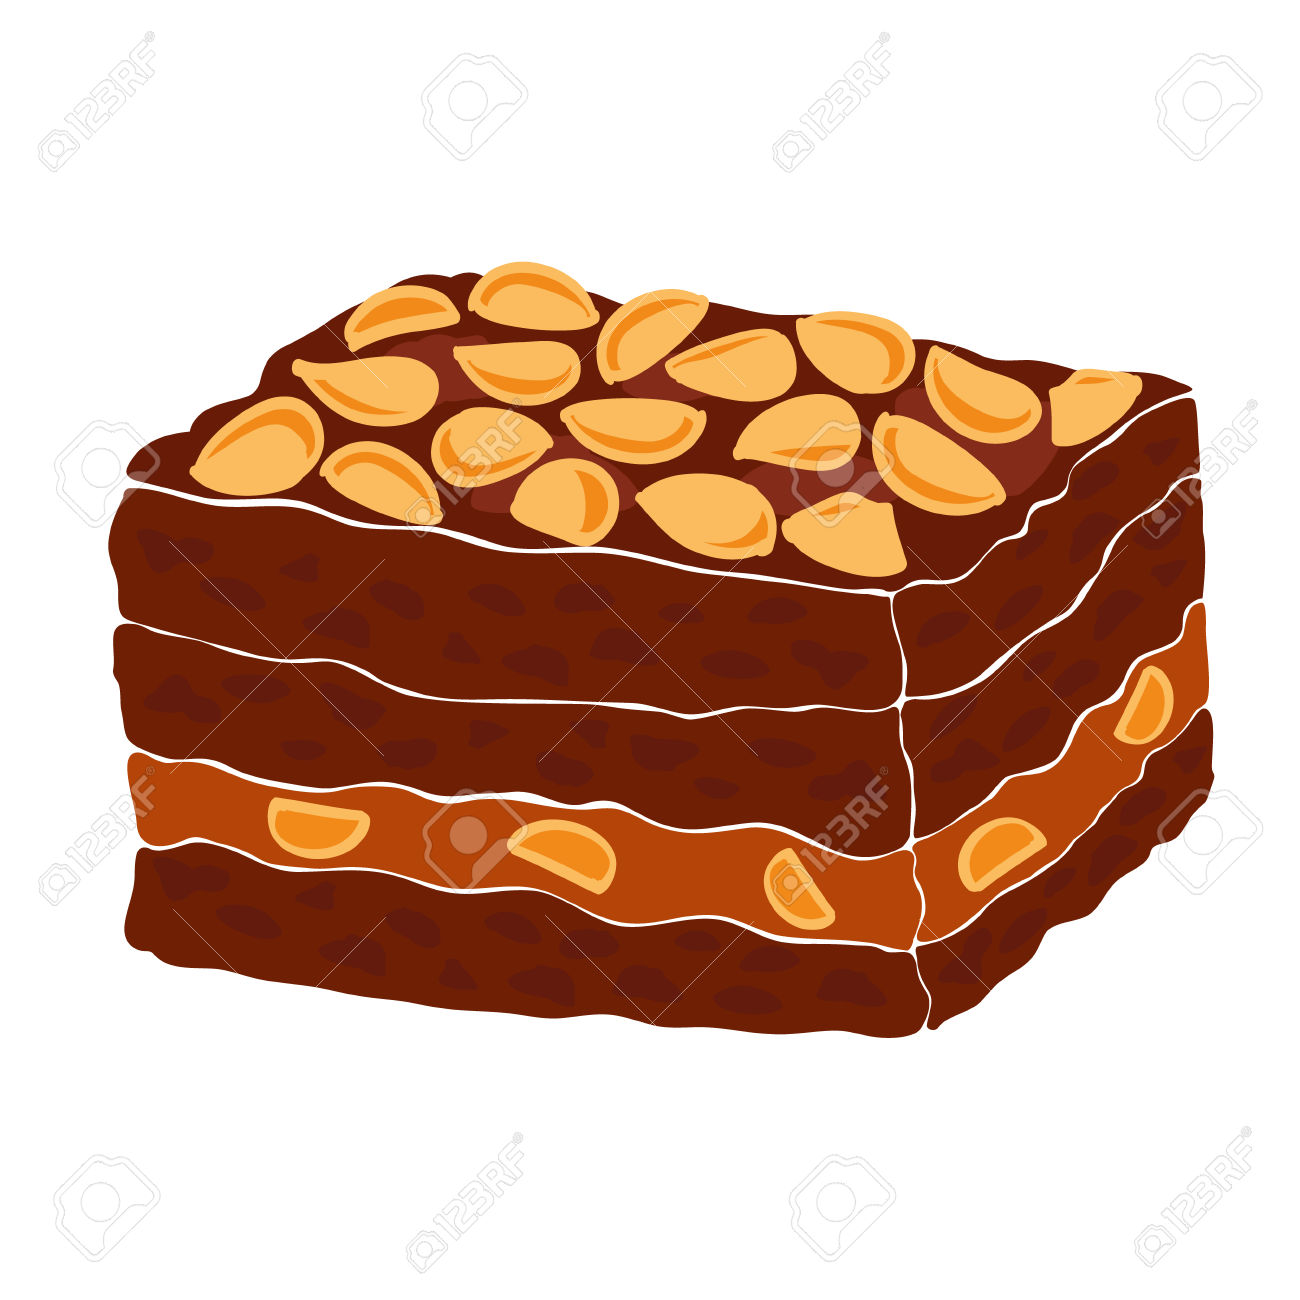 brownies clipart chcolate